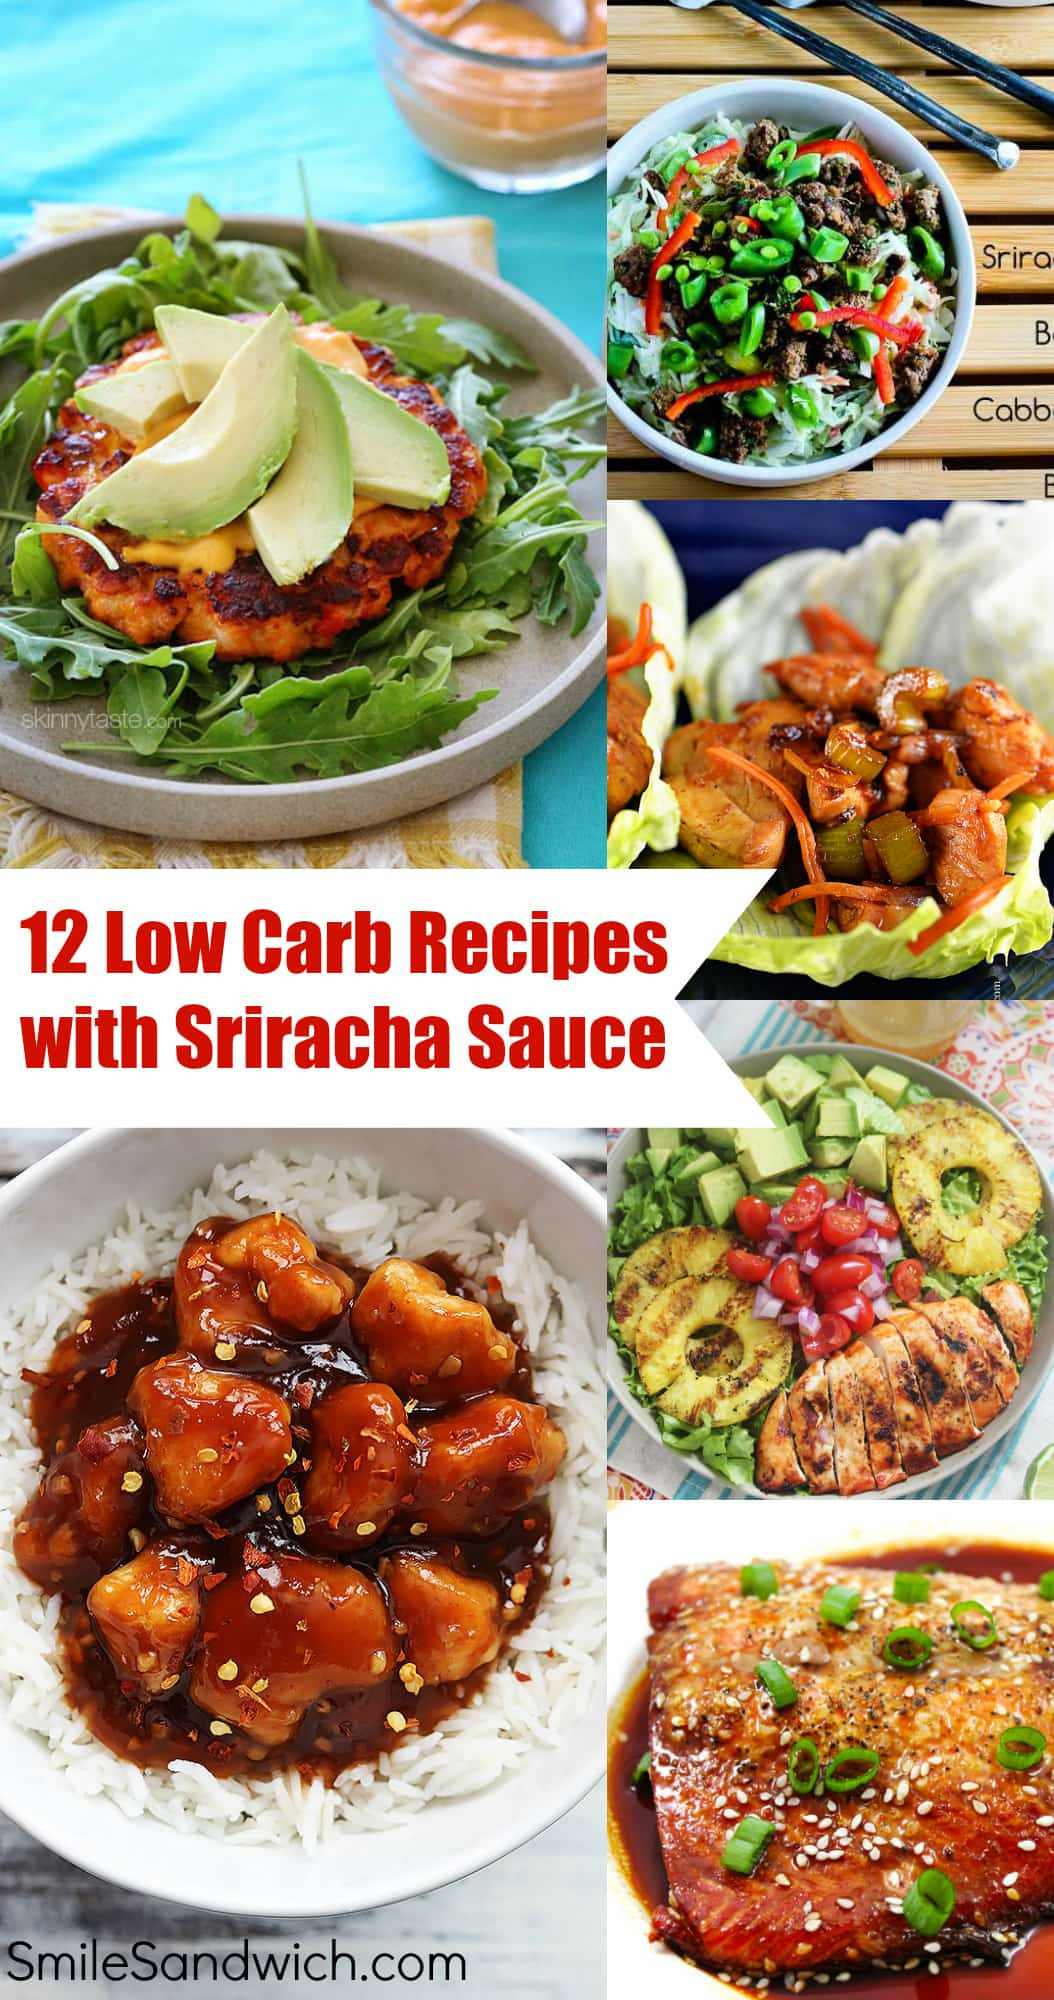 Low Carb Healthy Recipes
 12 Low Carb Recipes with Sriracha Sauce Smile Sandwich